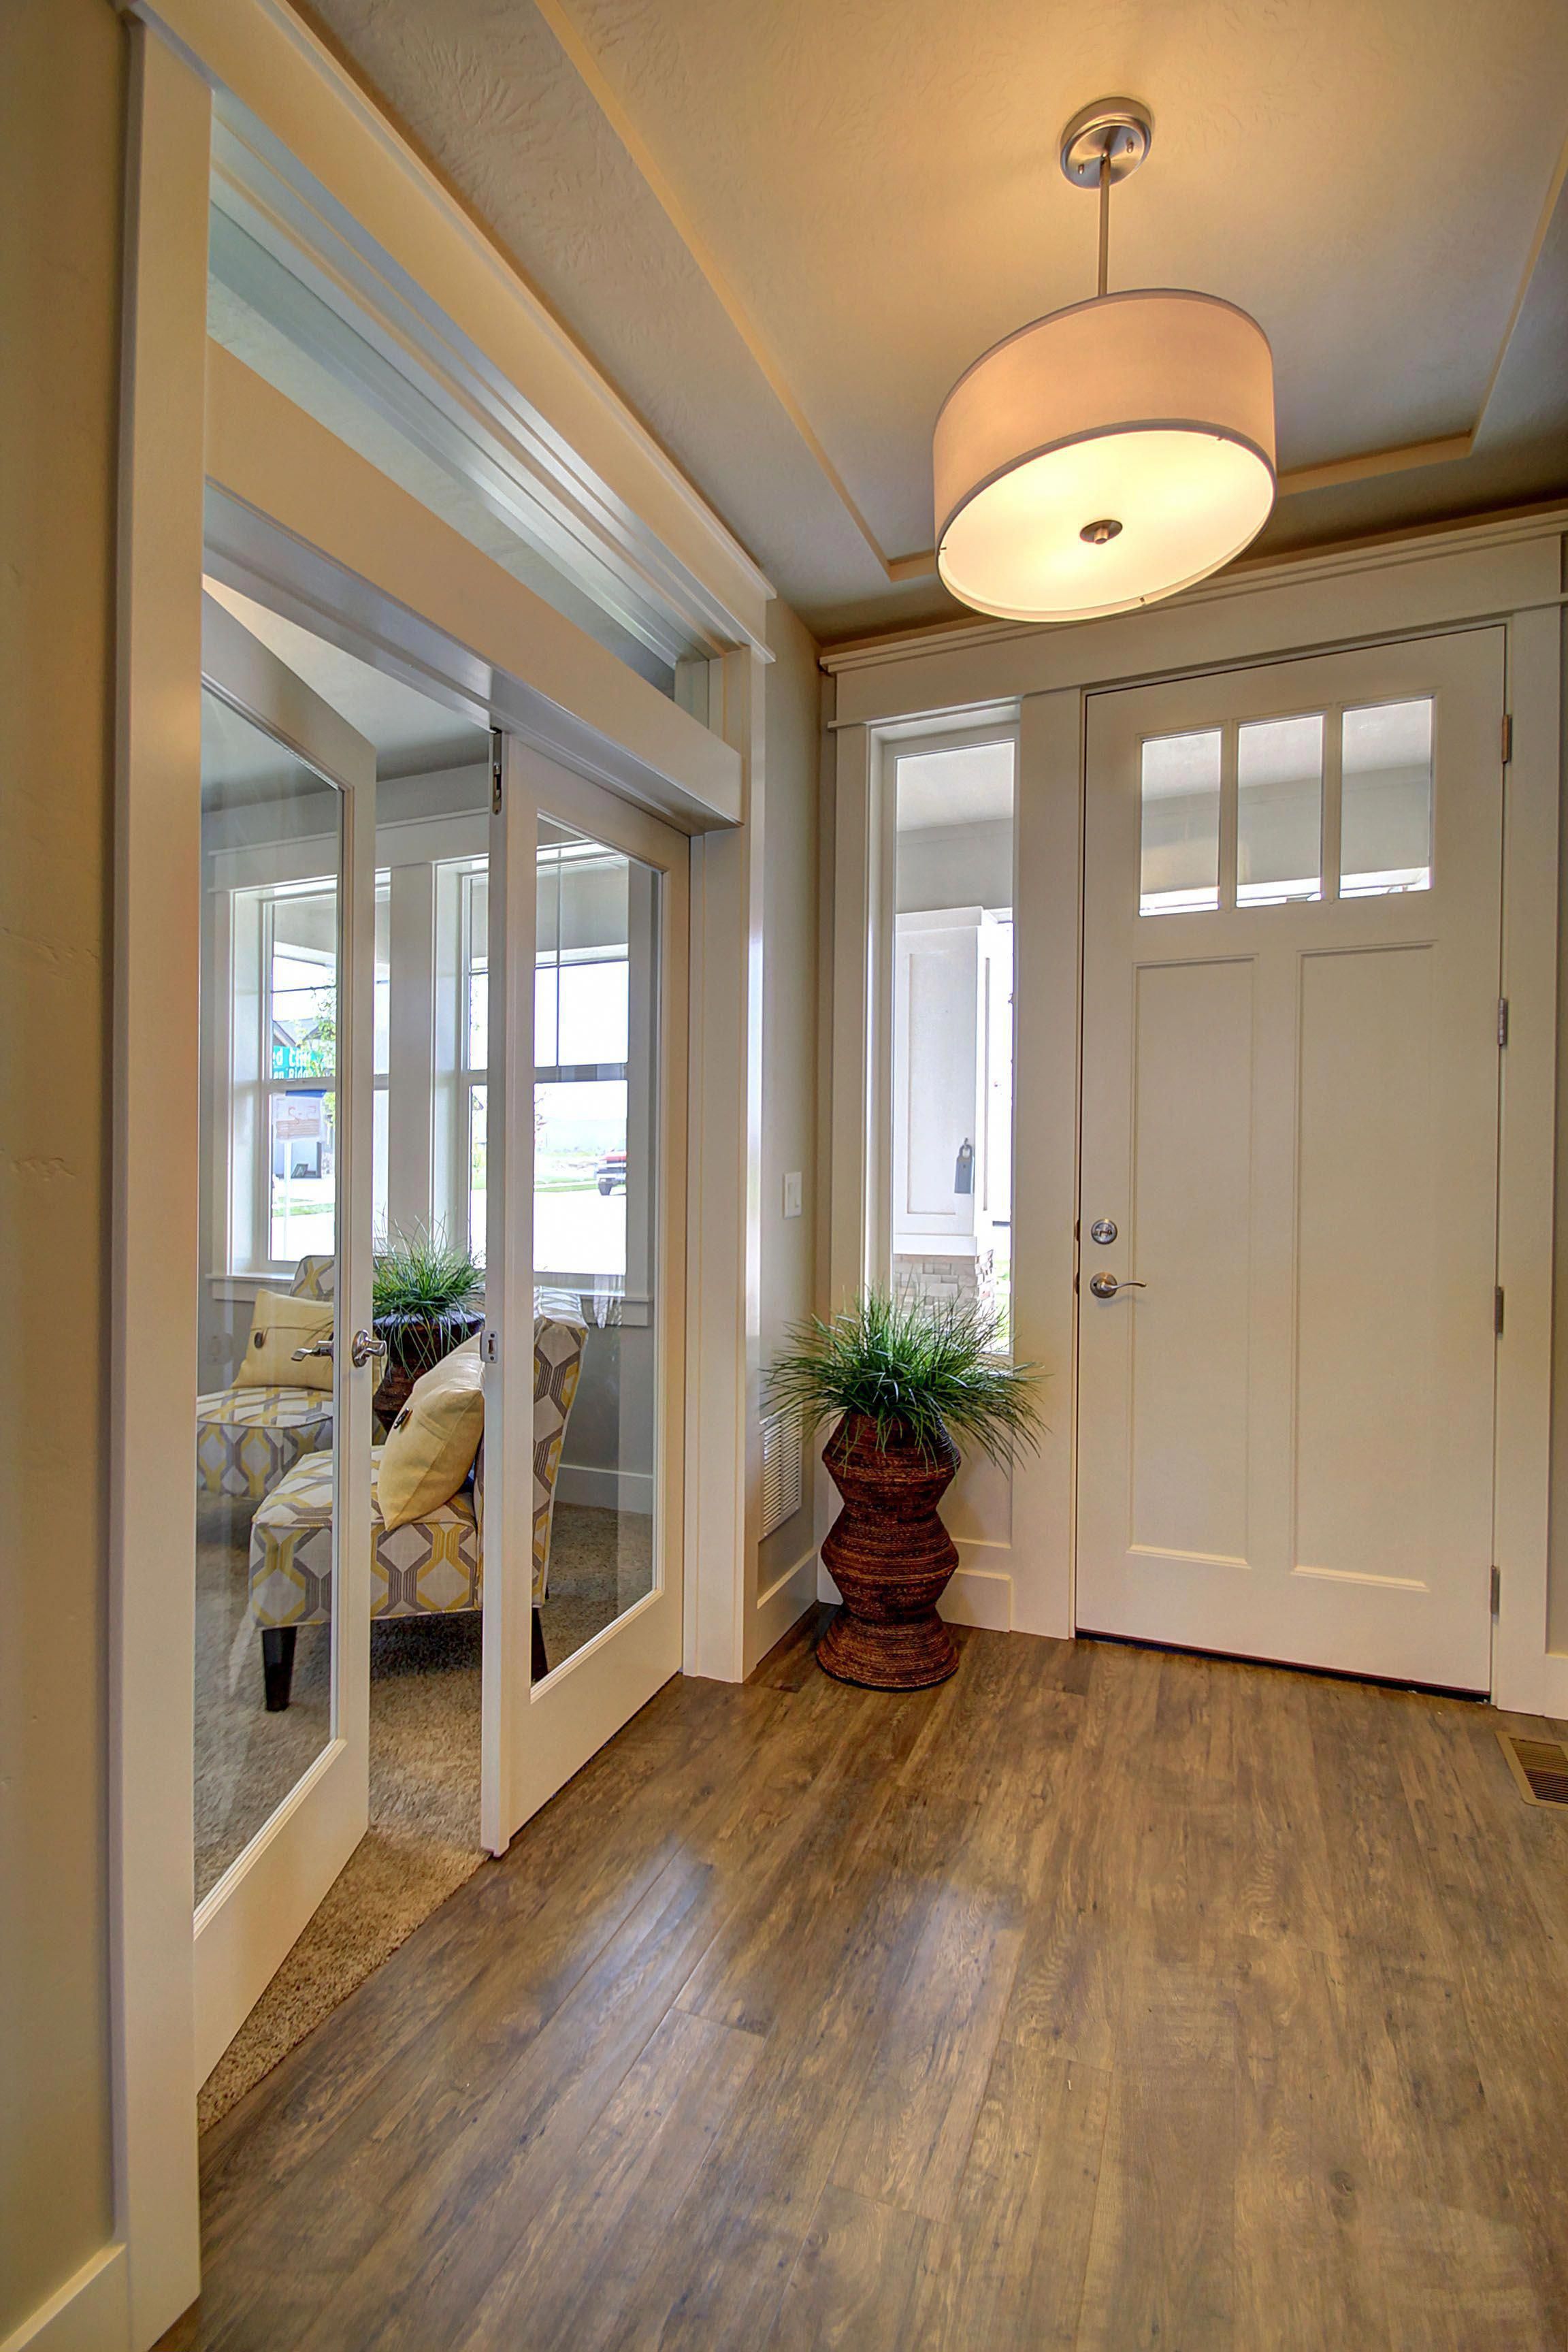 French Doors Inside: Merging Spaces With Style